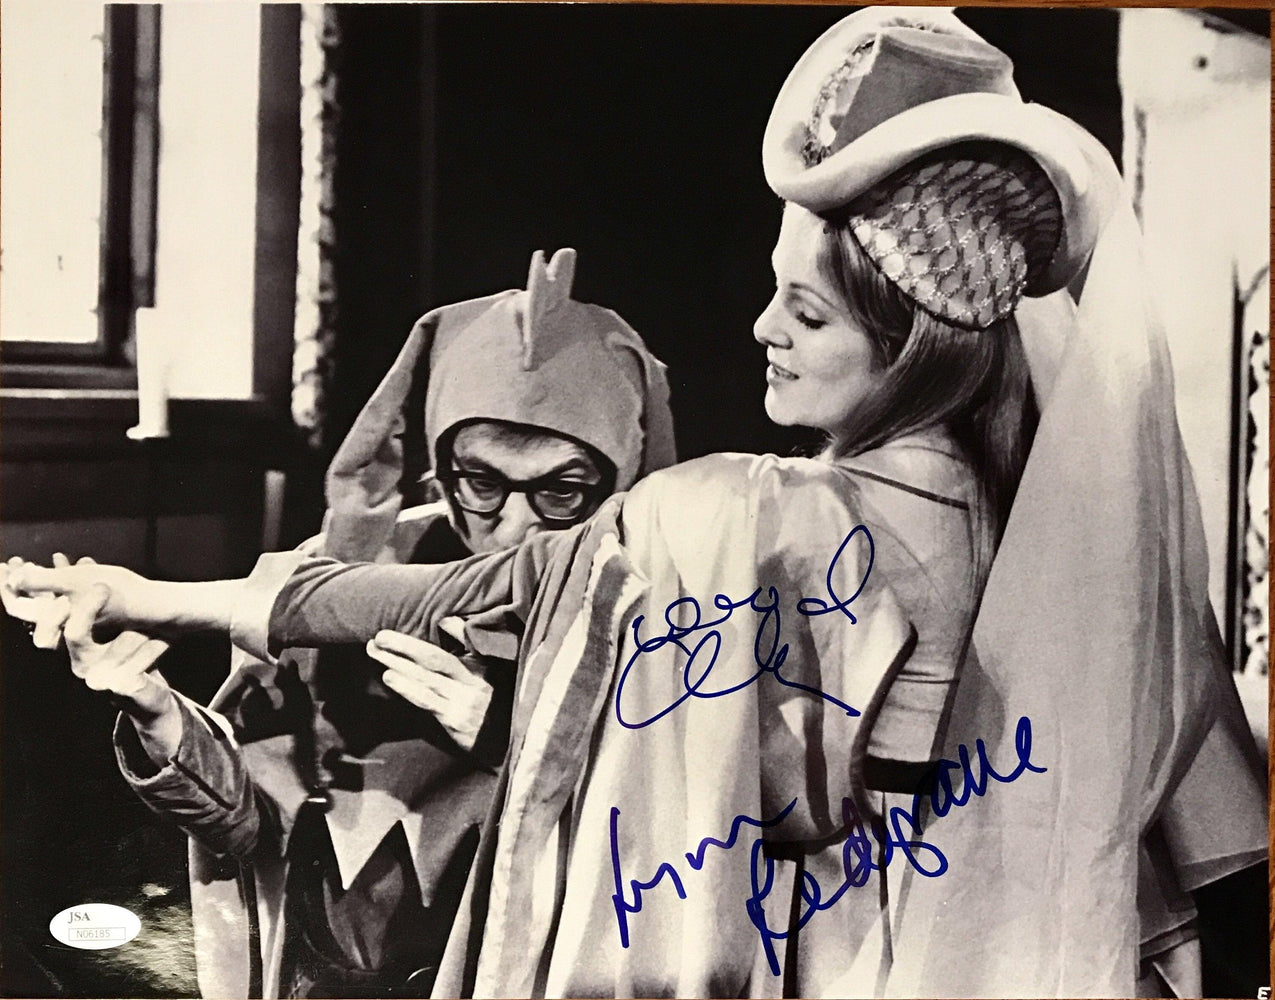 woody allenlynn redgrave signed 11x14 from everything about sex jsa n06185 certificate of authenticity